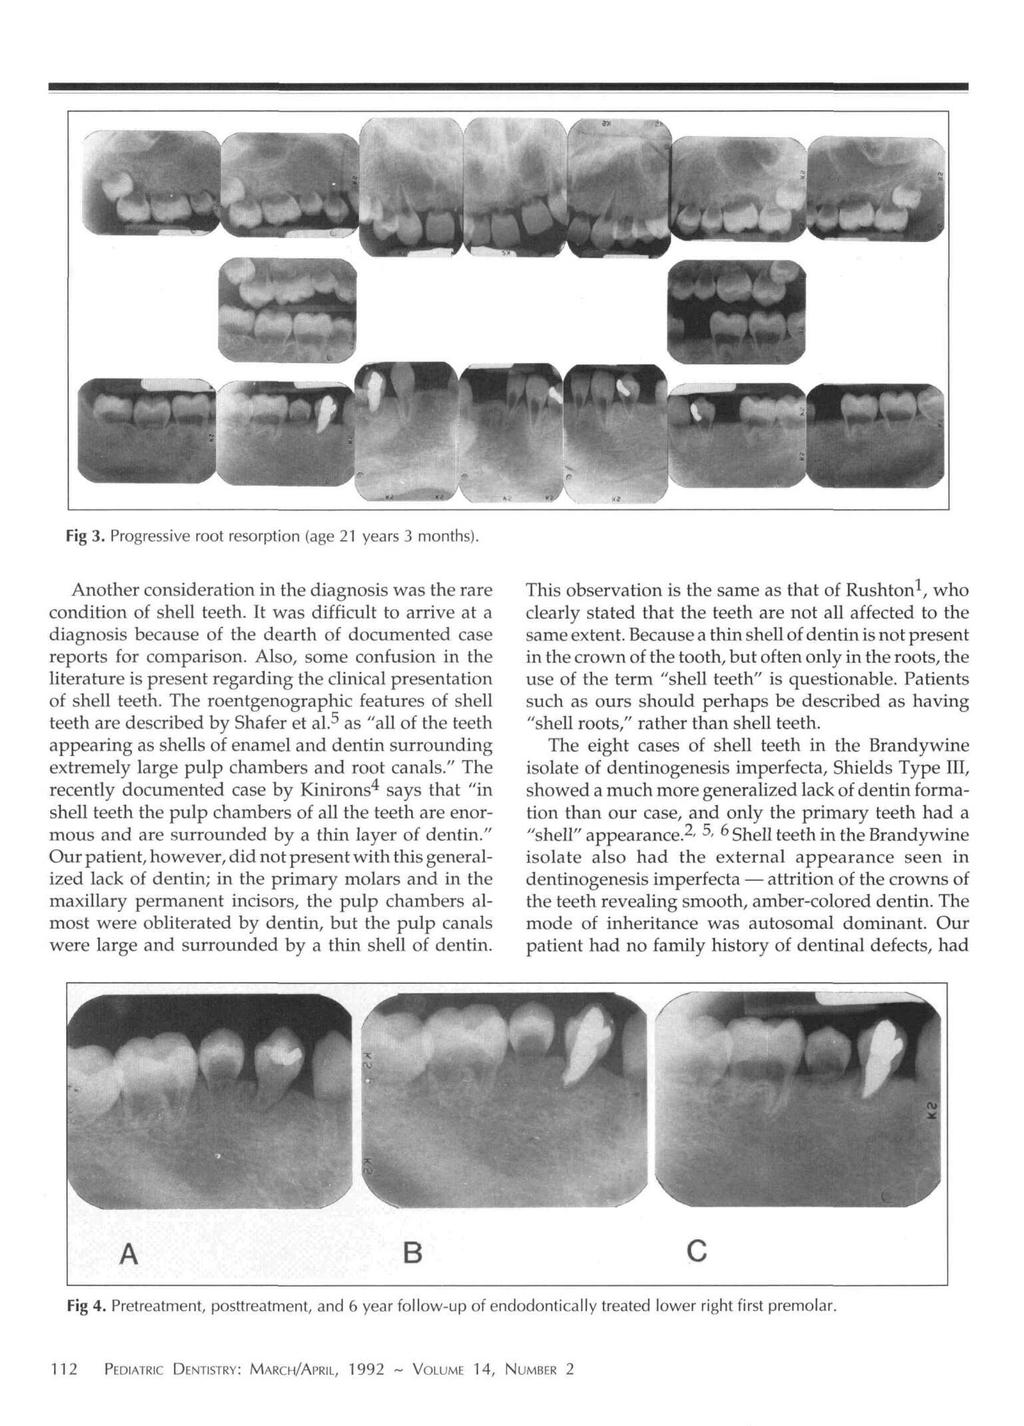 Fig 3. Progressive root resorption (age 21 years 3 months). Another consideration in the diagnosis was the rare condition of shell teeth.